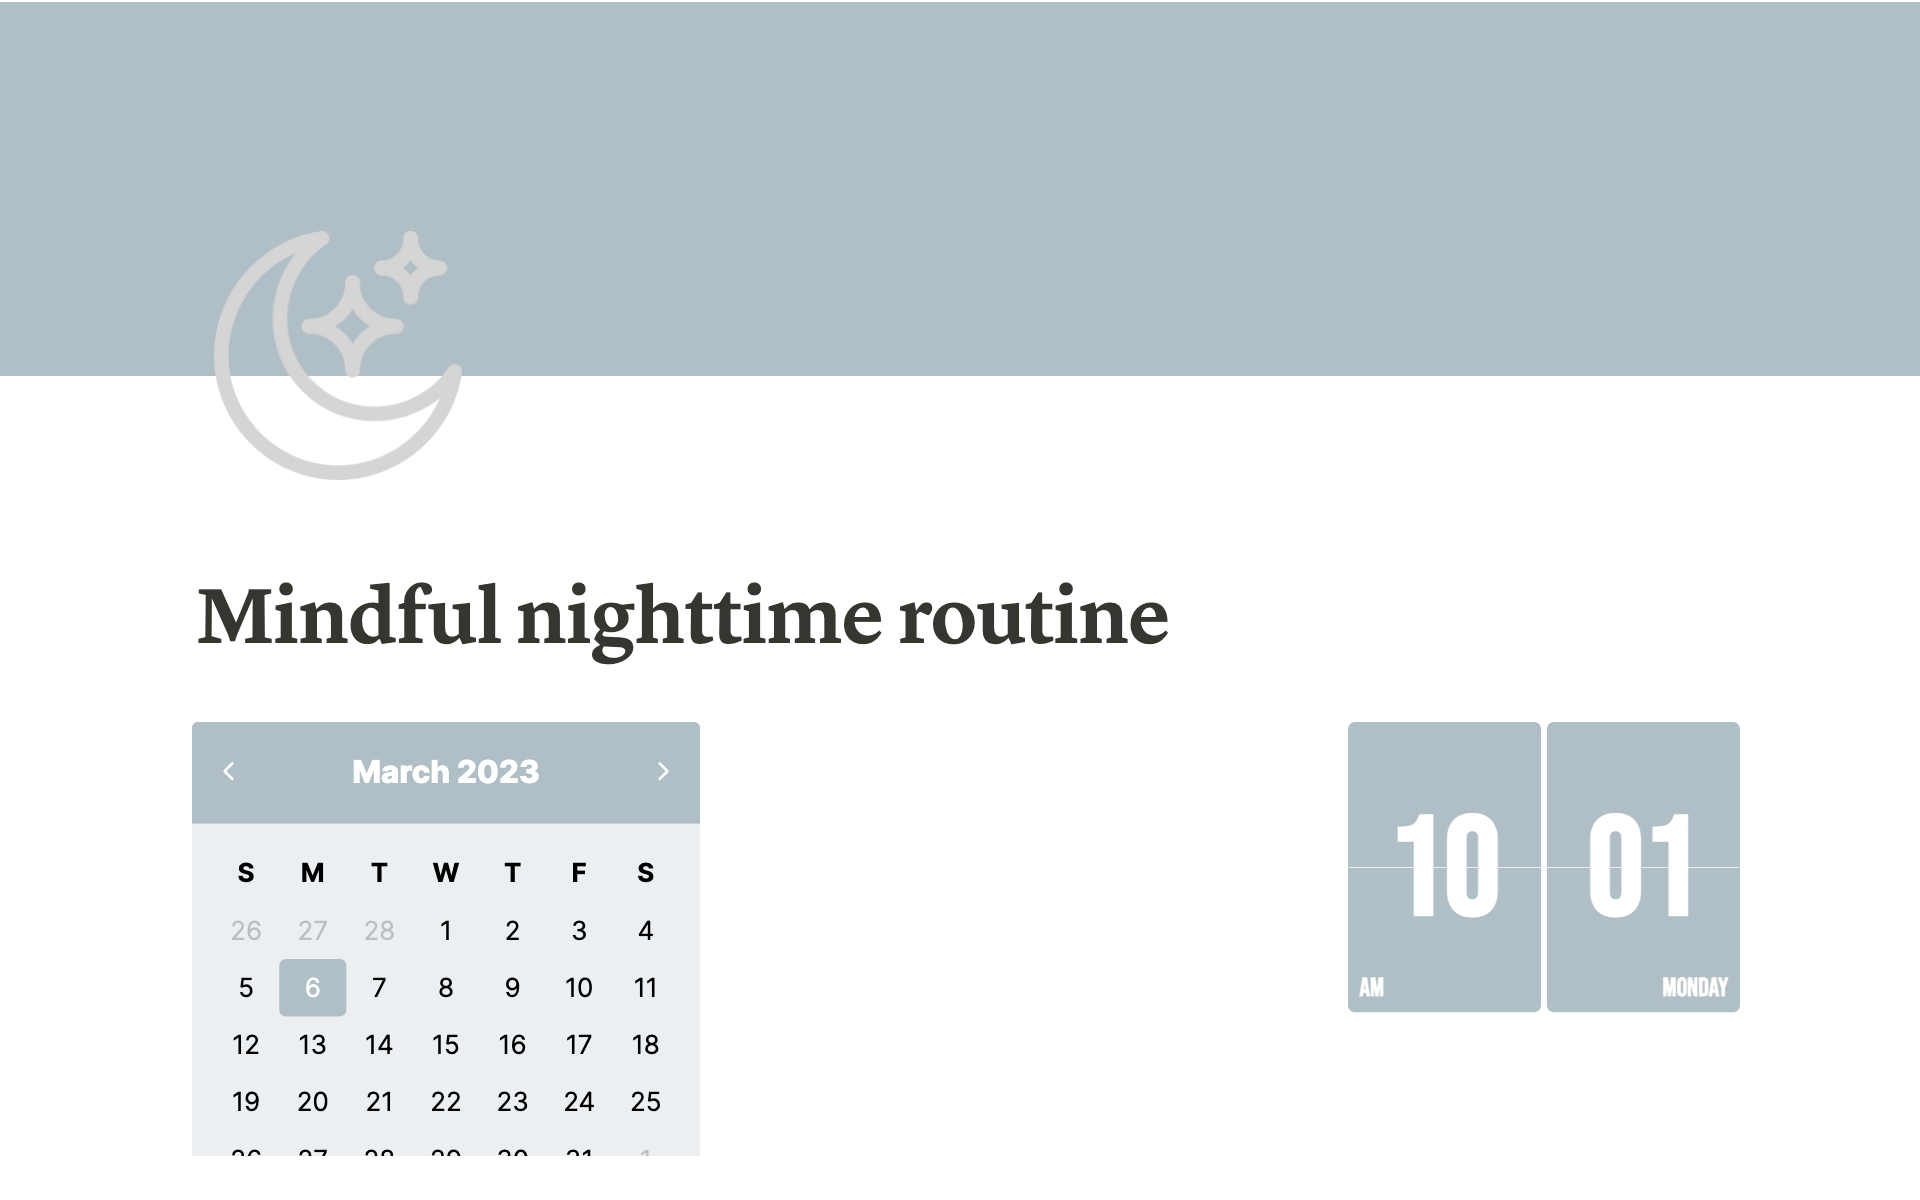 Help you create a more mindful nighttime routine. :)